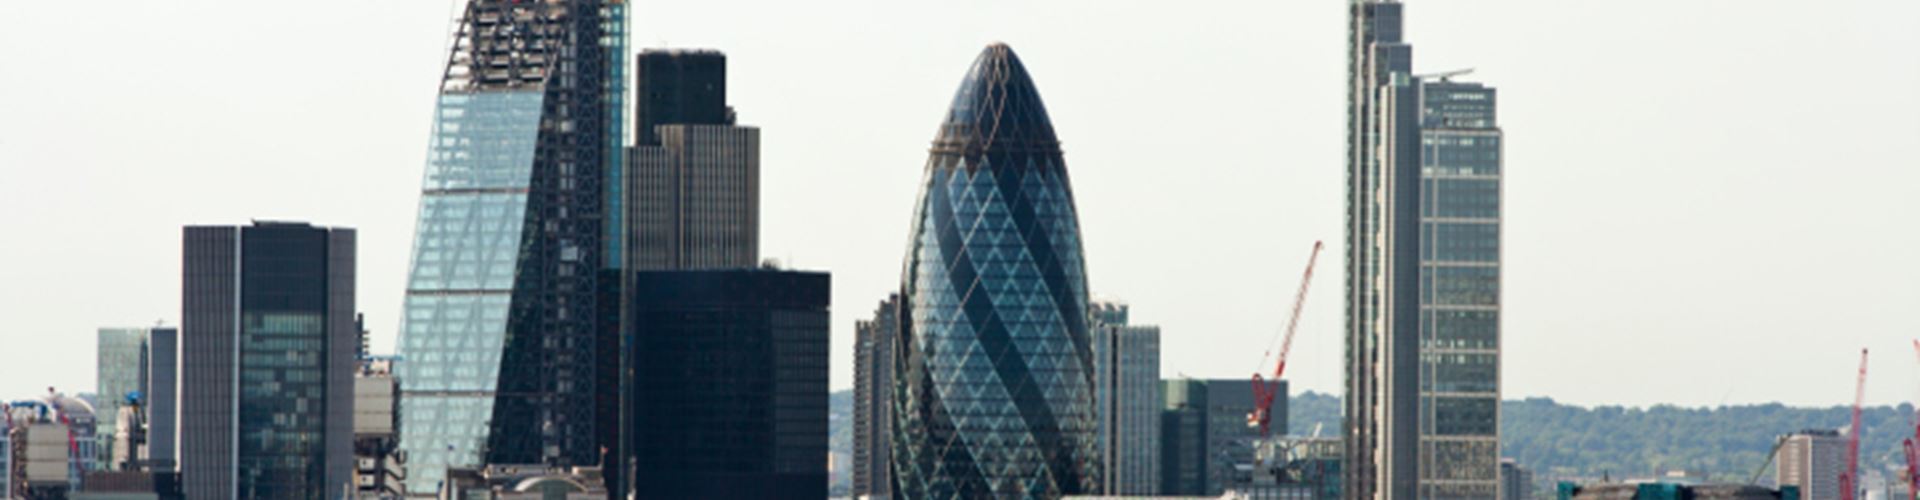 City growth boosts UK financial services trade surplus to £62bn